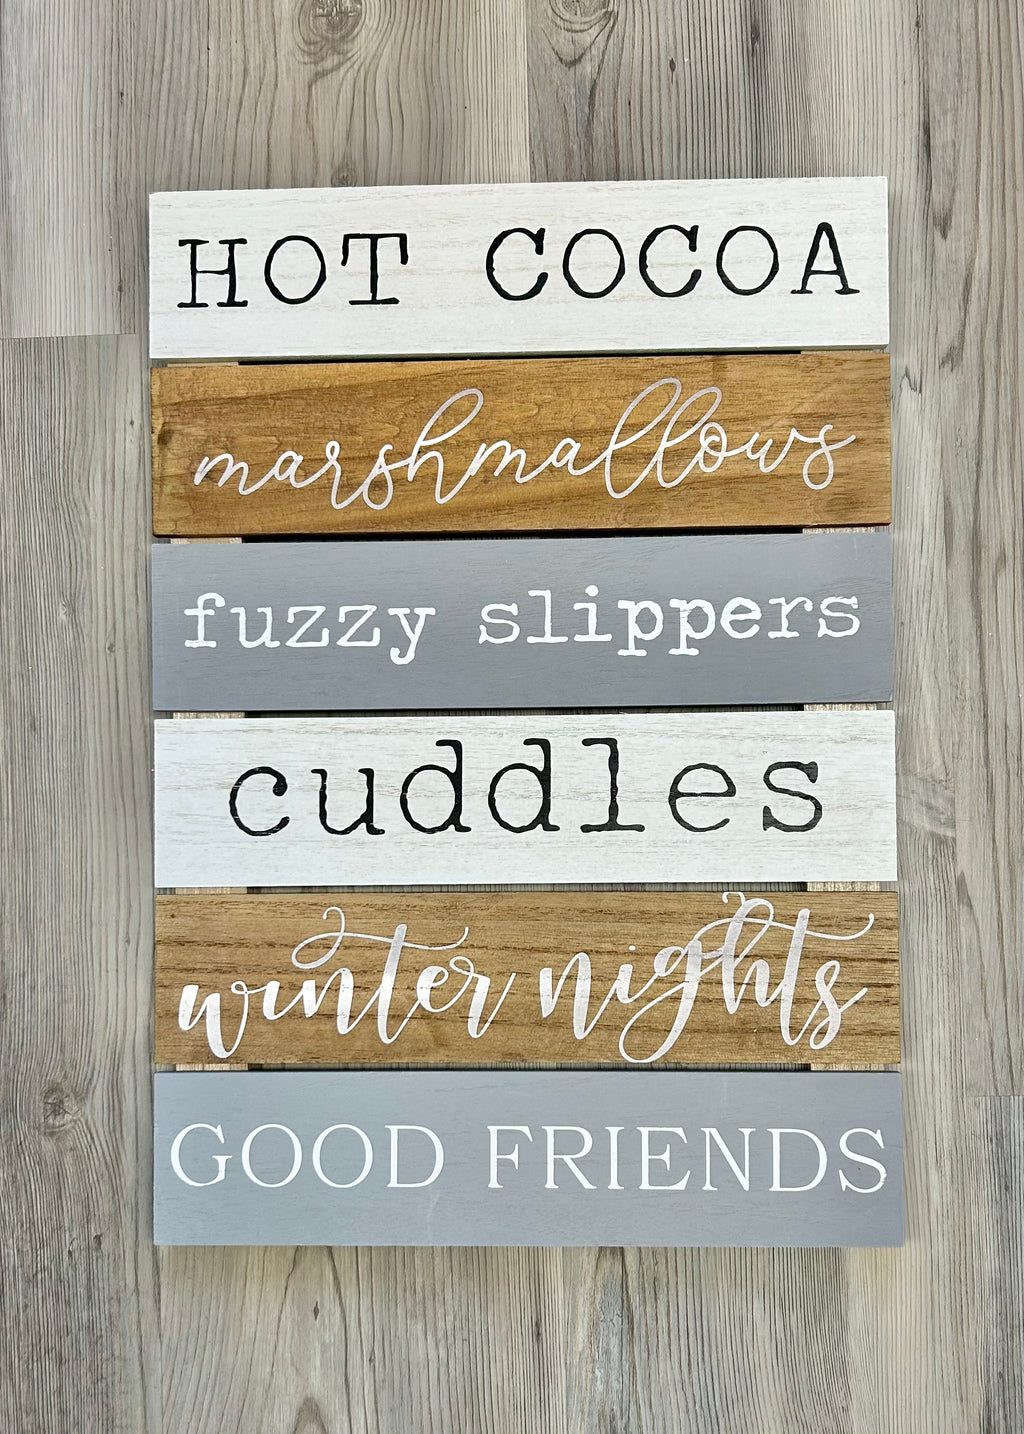 Hot Cocoa Wooden Plank Christmas Sign